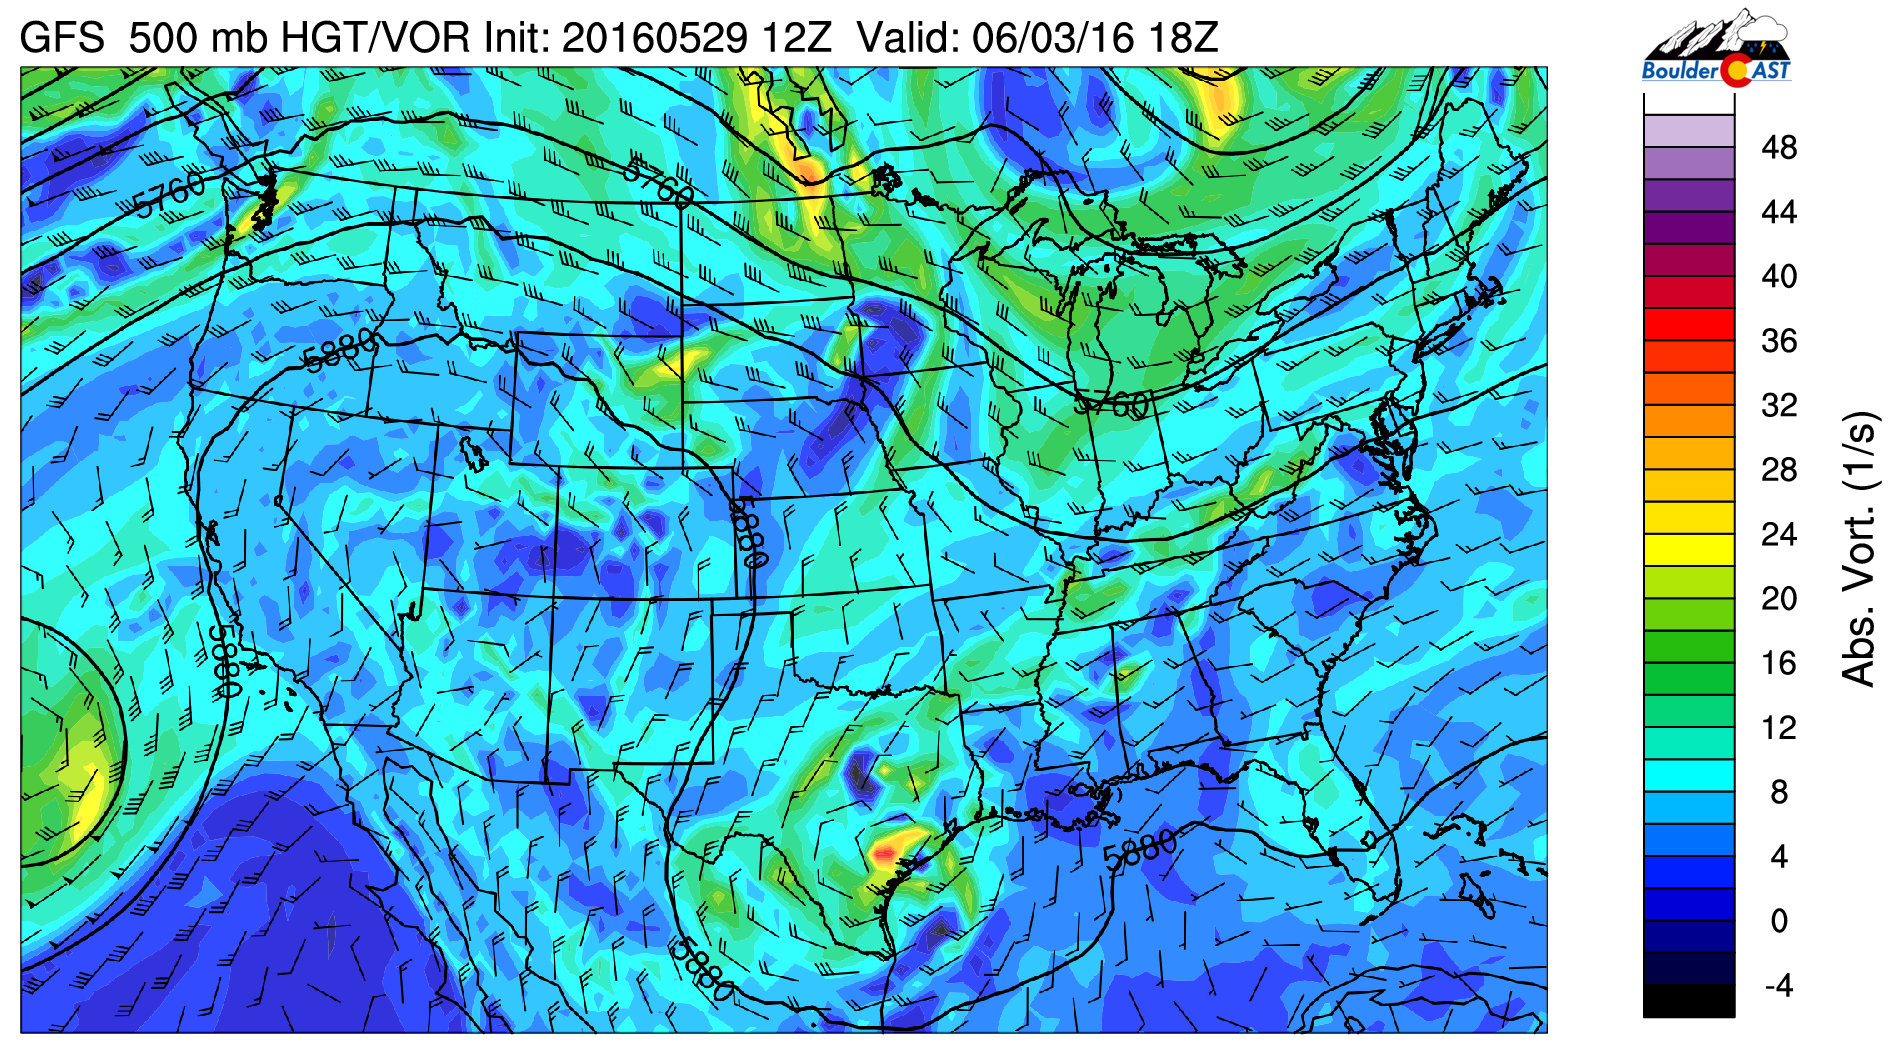 GFS 500 mb vorticity for Friday